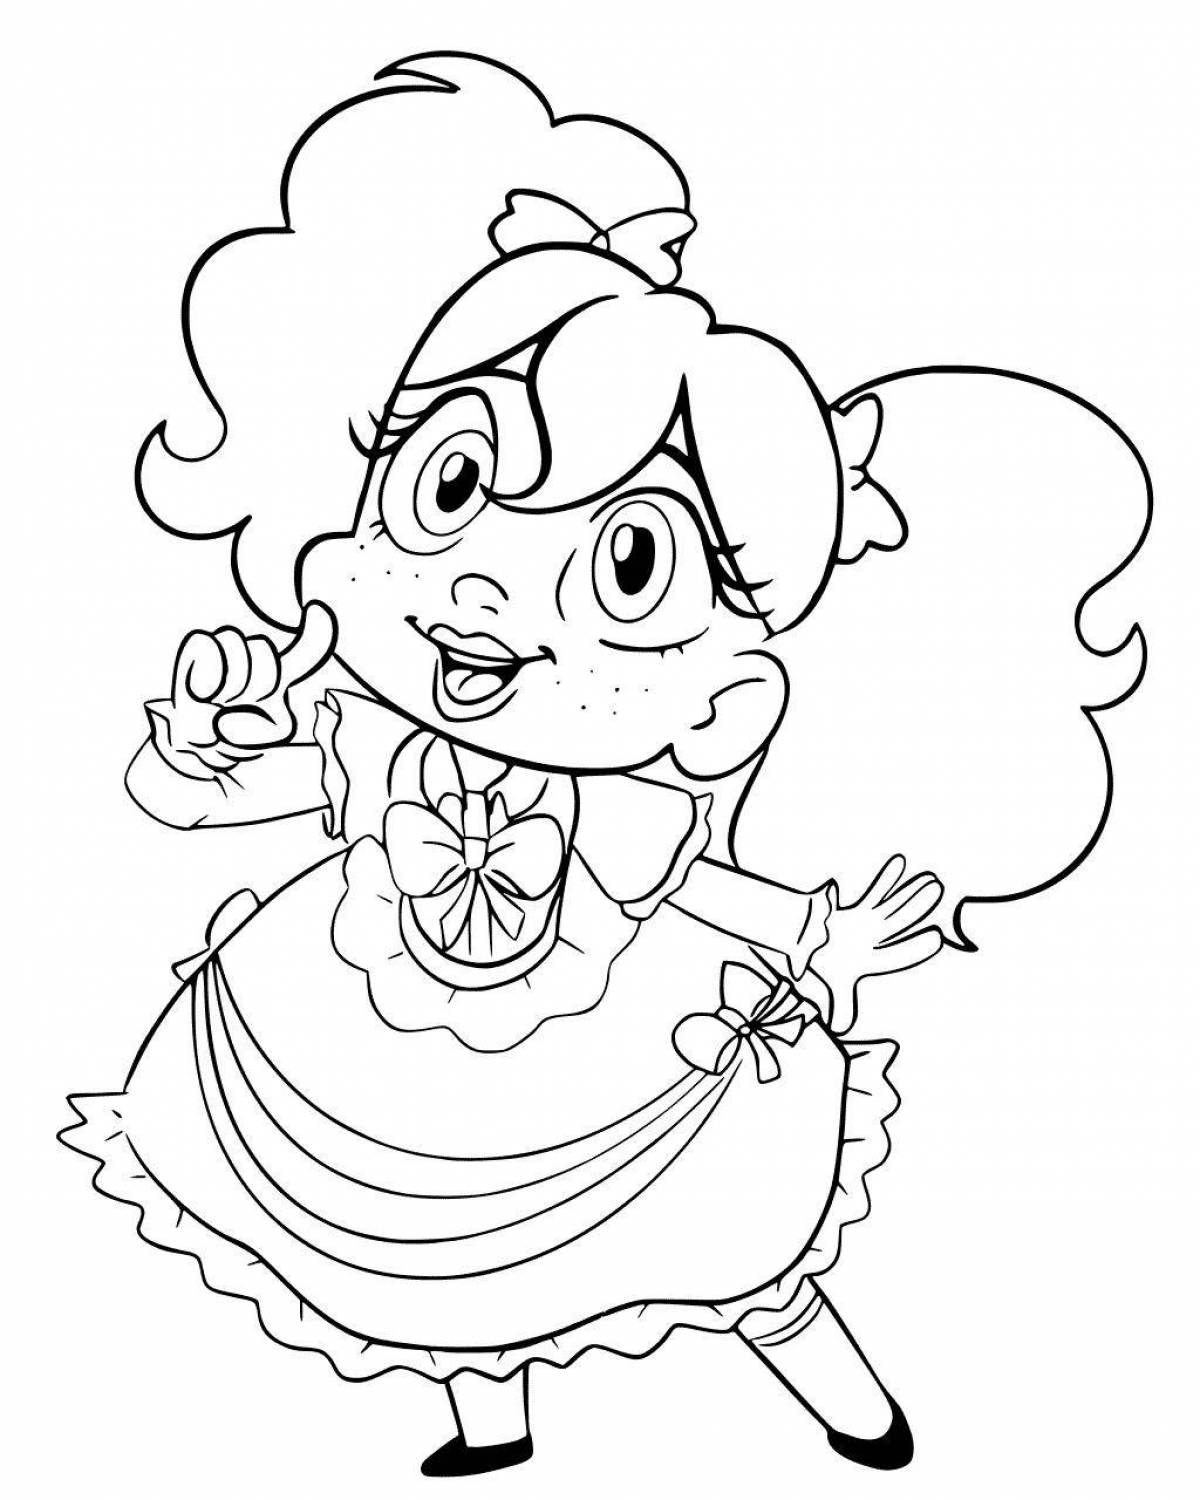 Coloring page happy poppy while playing